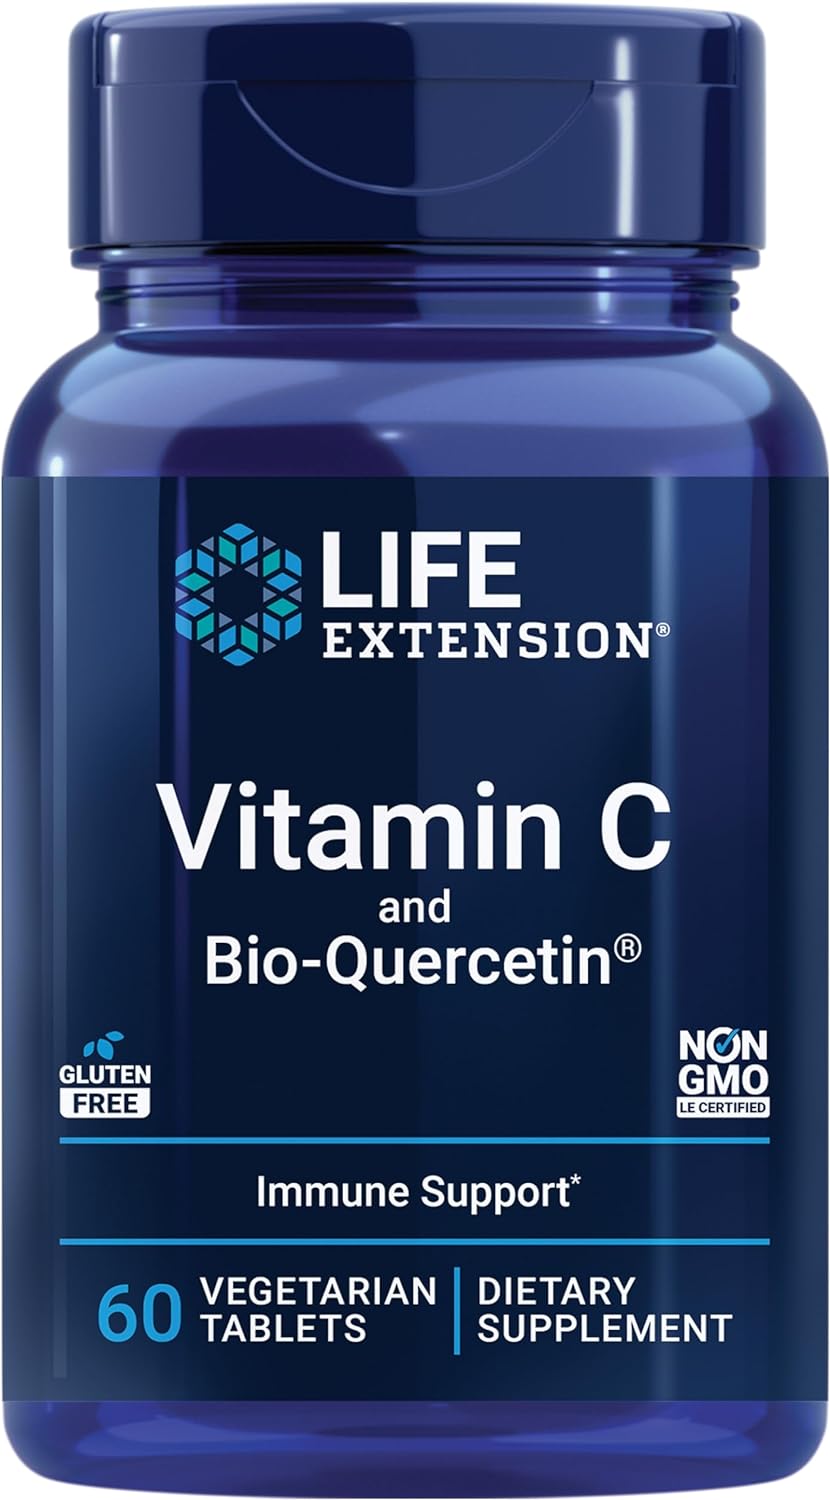 Life Extension Vitamin C with Bio-Quercetin Phytosome 1000mg - Daily Absorbable High Potency Vitamin C Supplement - For